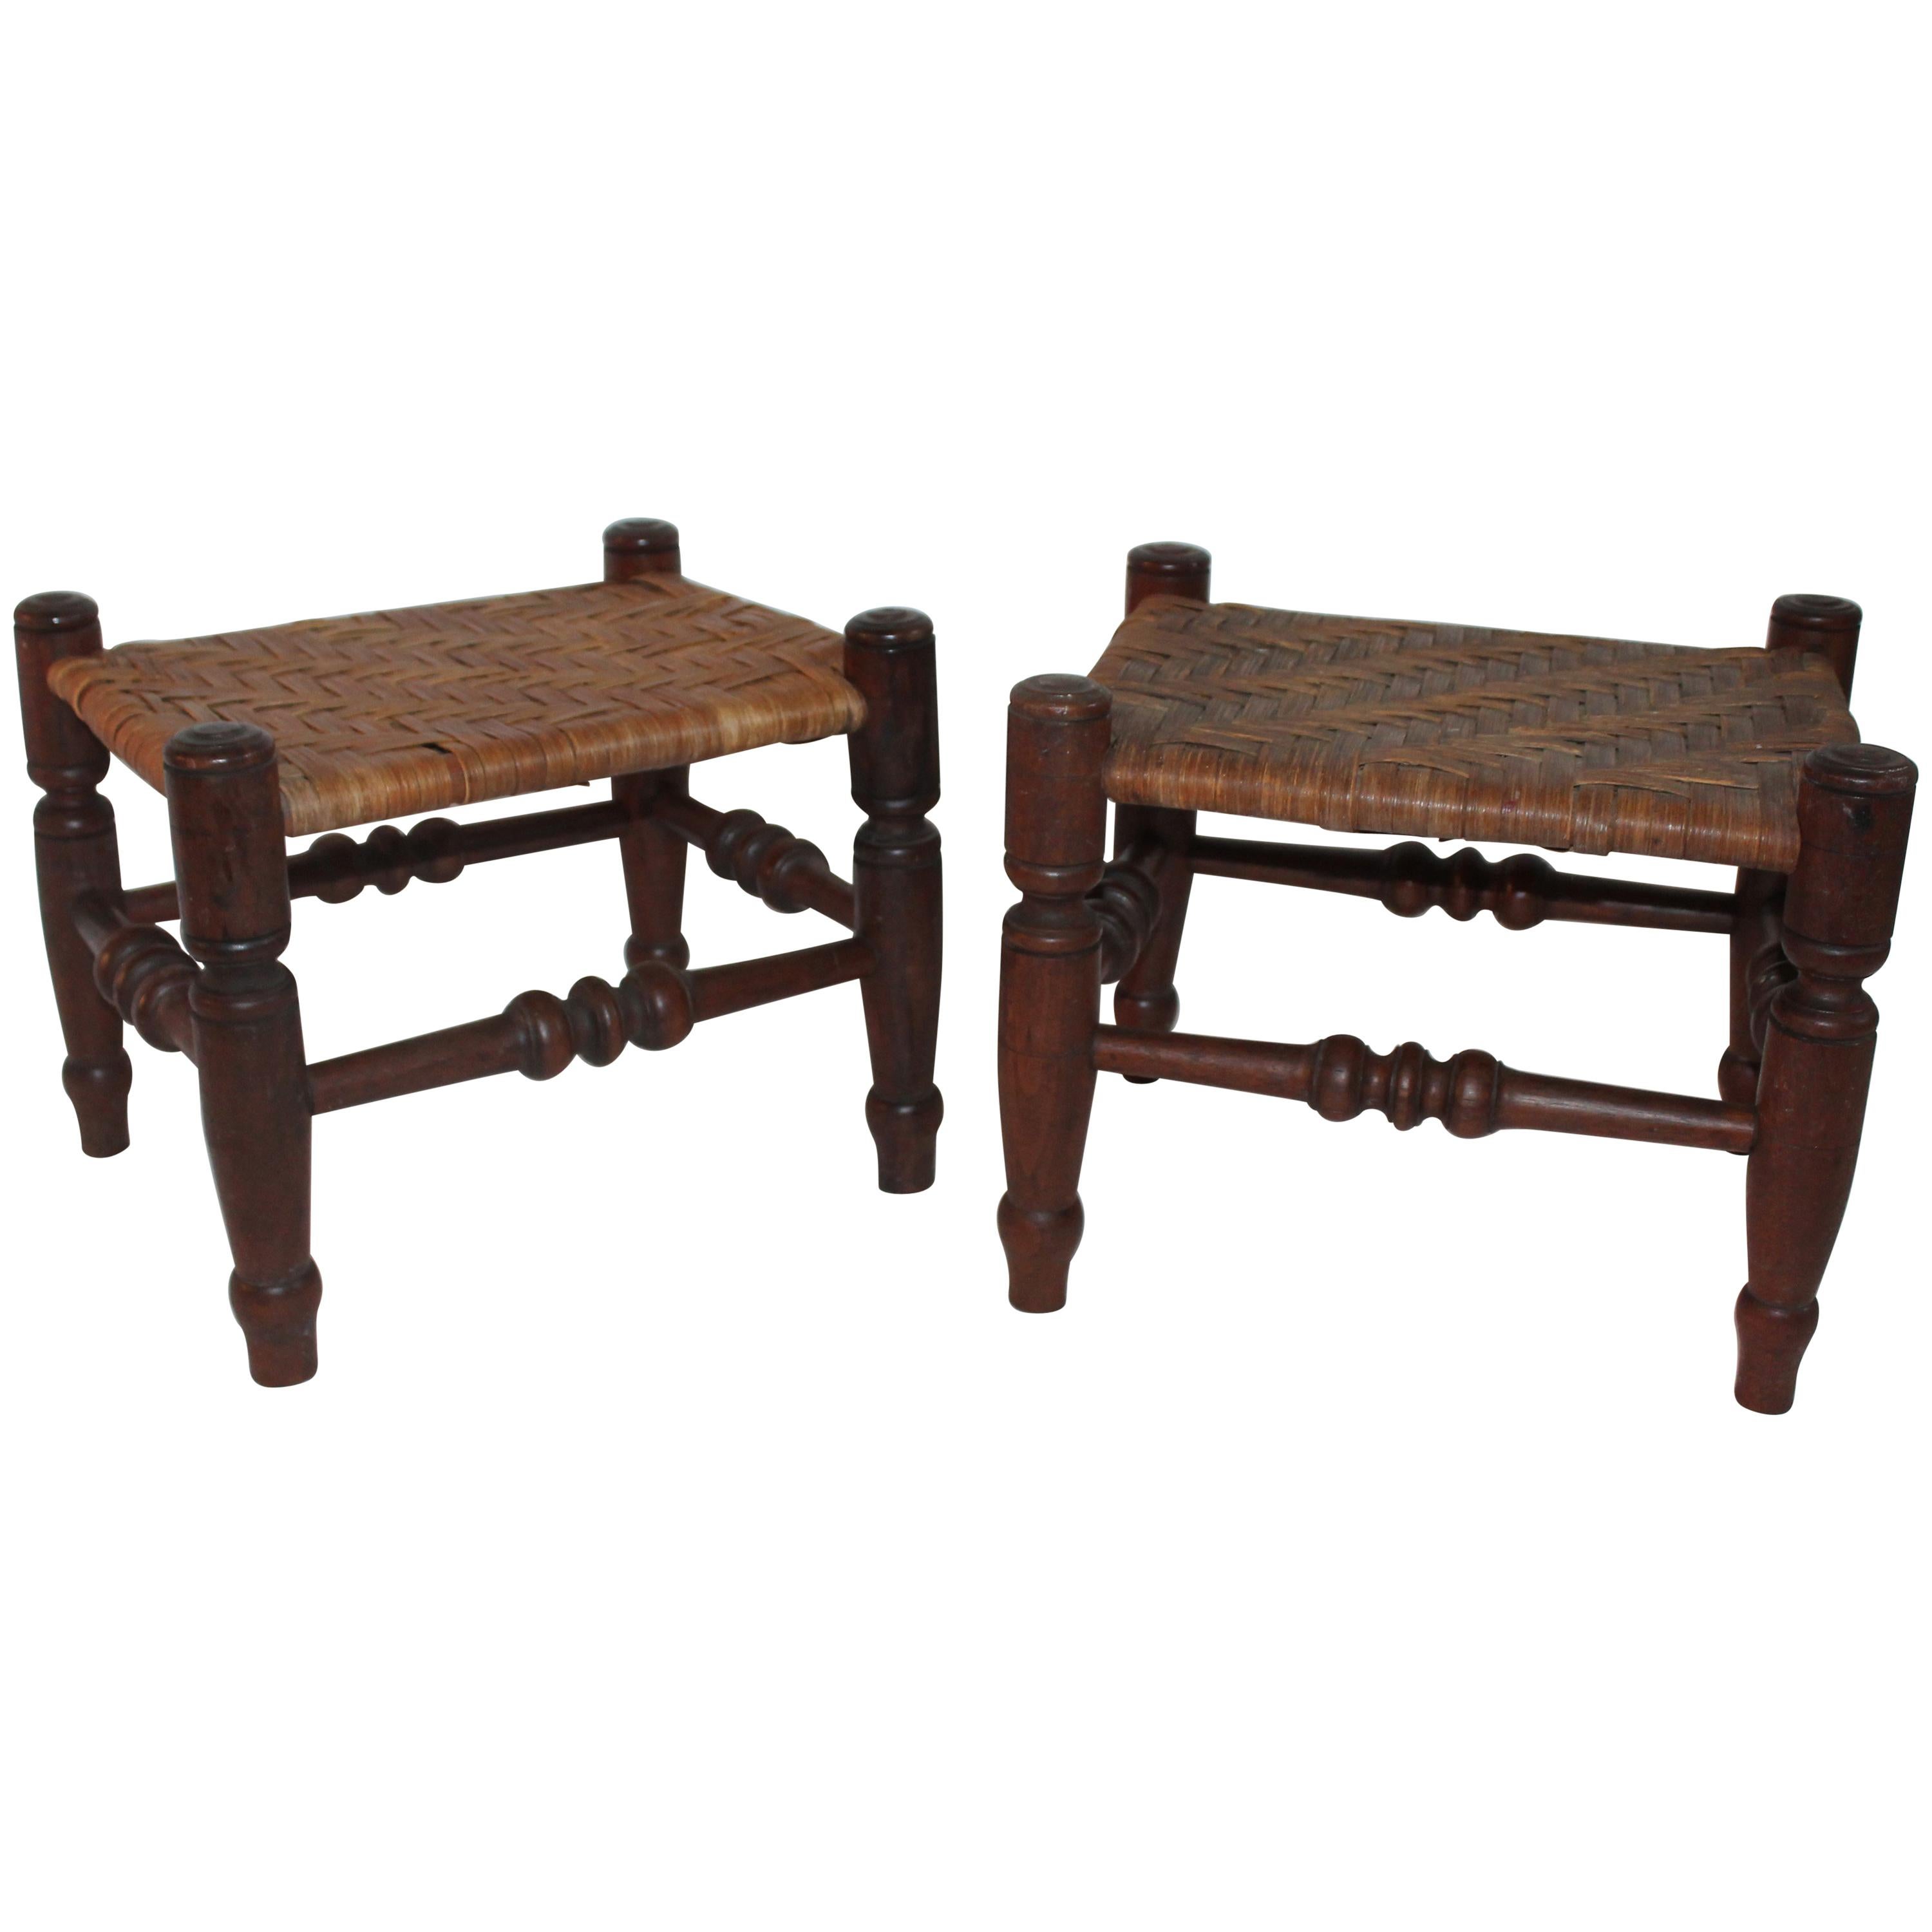 Early 19th Century Foot Stools, Pair